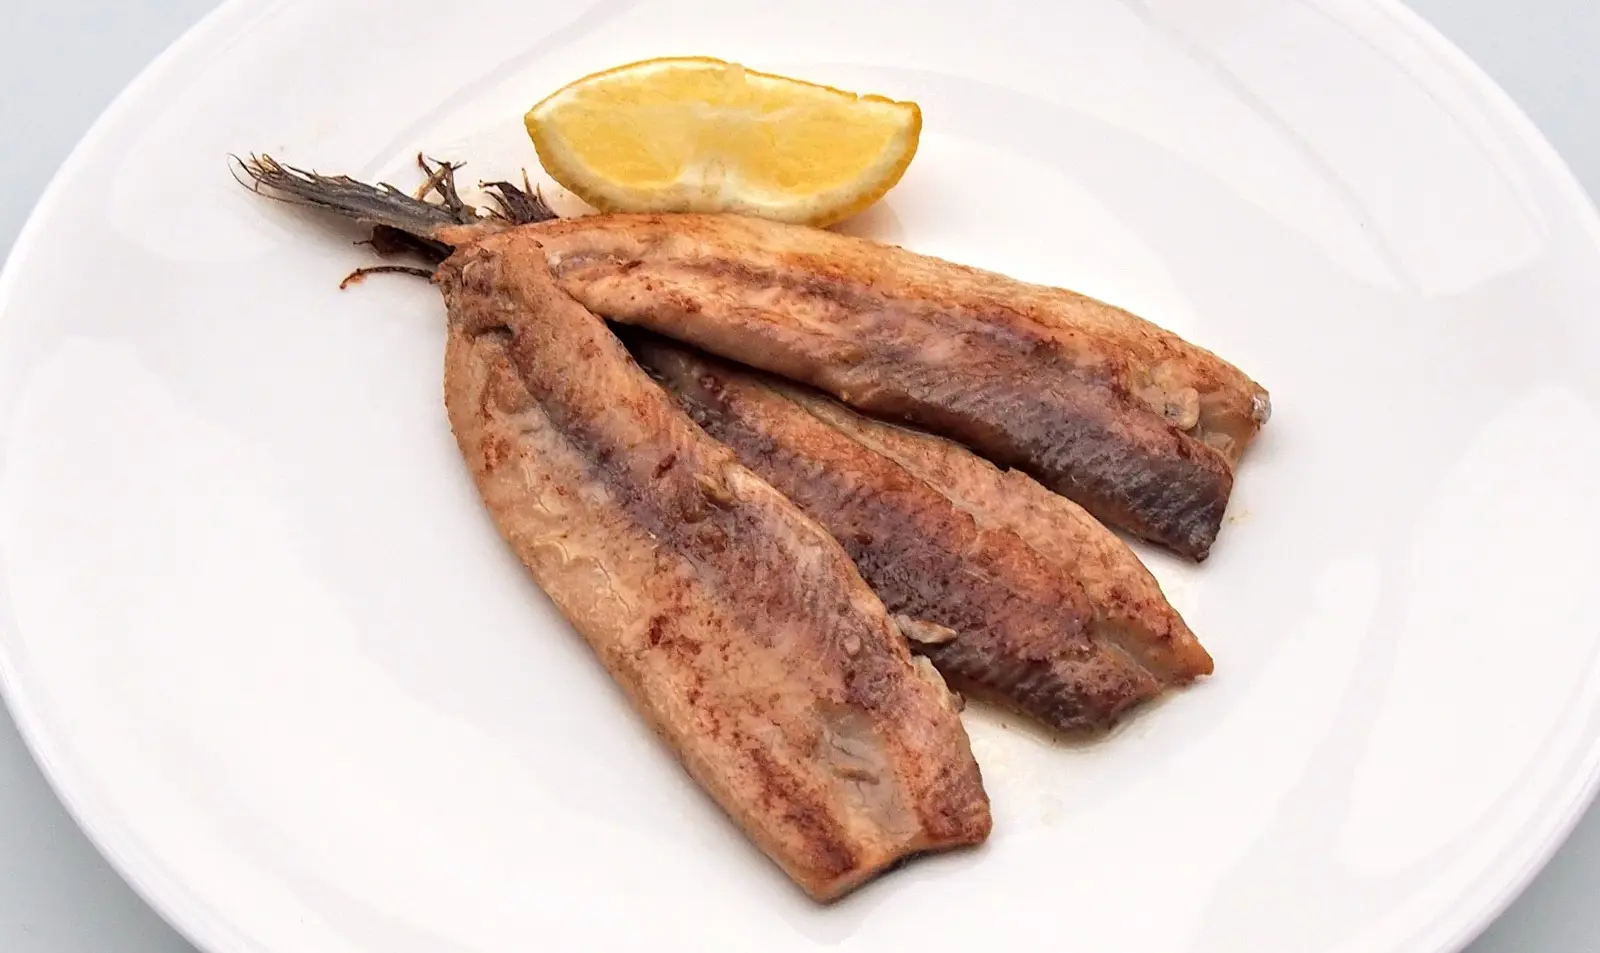 herring salted in brine smoked and cured - What is a pointed stick used in driving cattle